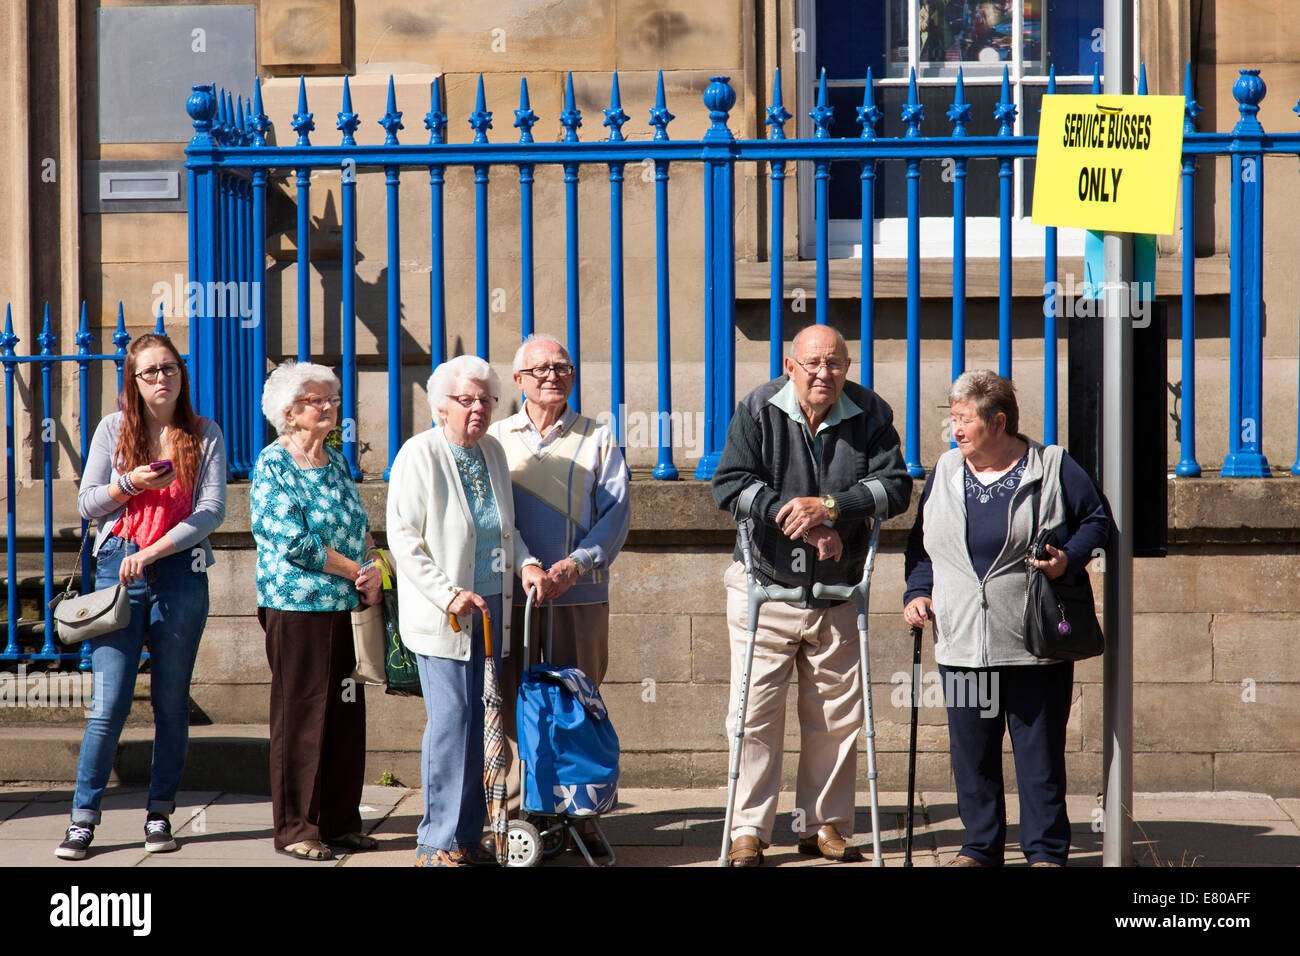 Elderly passengers queuing at a bus stop in Bakewell, Derbyshire, England, U.K. Stock Photo